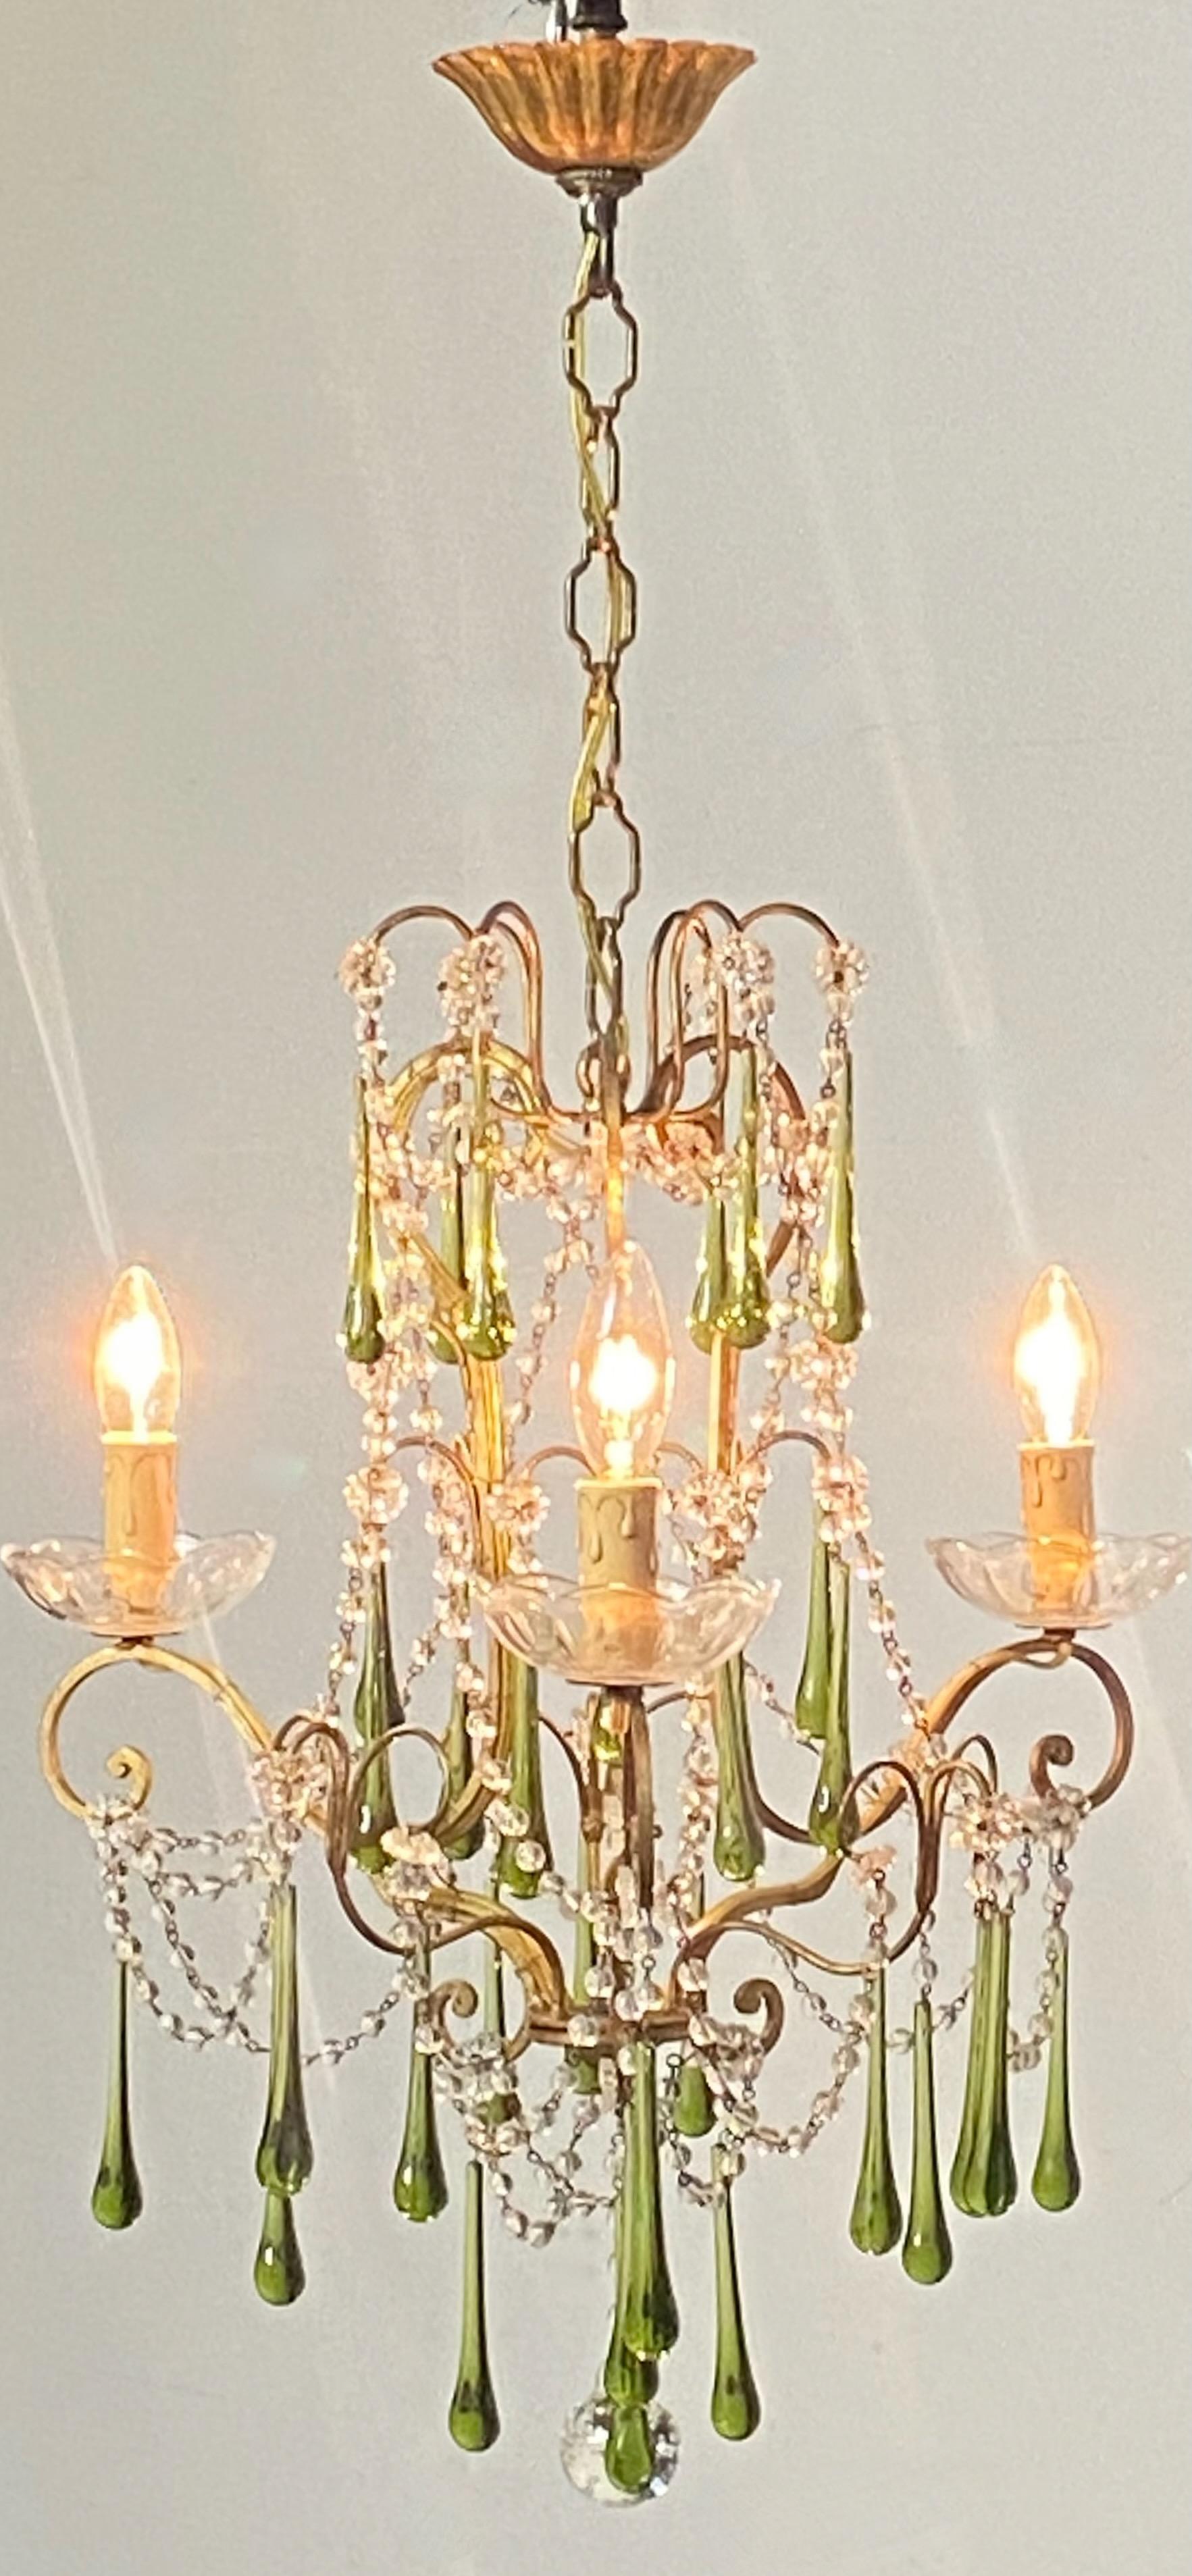 20th Century Petite Italian Crystal and Green Glass Chandelier, 1950's-1960's For Sale